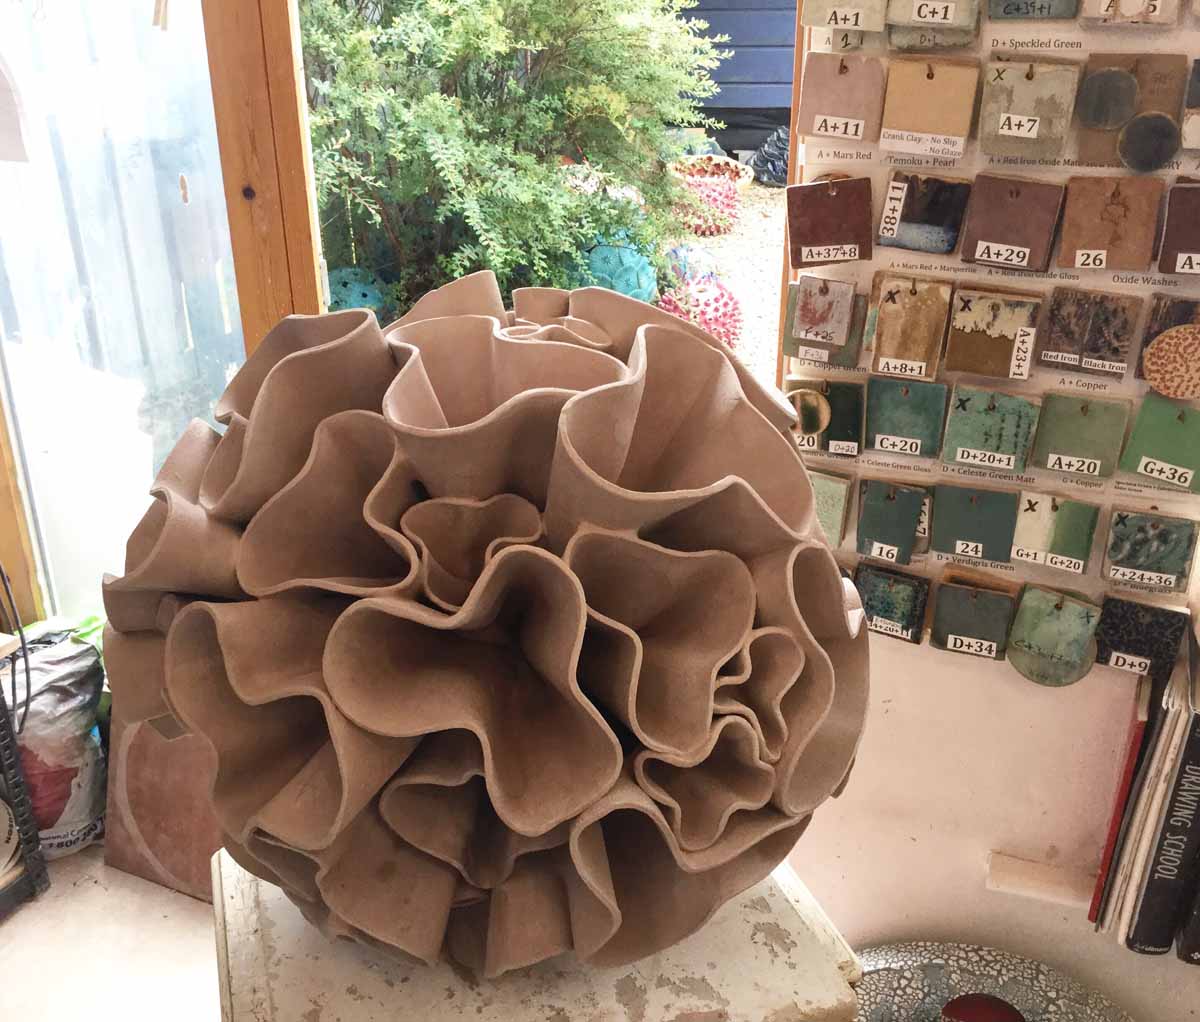 Ceramic water sculpture 'Synthesis' by Michelle Maher. Studio process - here we see my 'Synthesis' sculpture drying in my studio before firing. Each bracket was sculpted individually. To be exhibited at Sculpture in Context 2016 at The National Botanic Gardens in Dublin. Inspired by Dahlia and Coral forms, it was handmade in my own grogged paper clay body and high fired in an electric kiln to 1260°C (Cone 8). www.ceramicforms.com